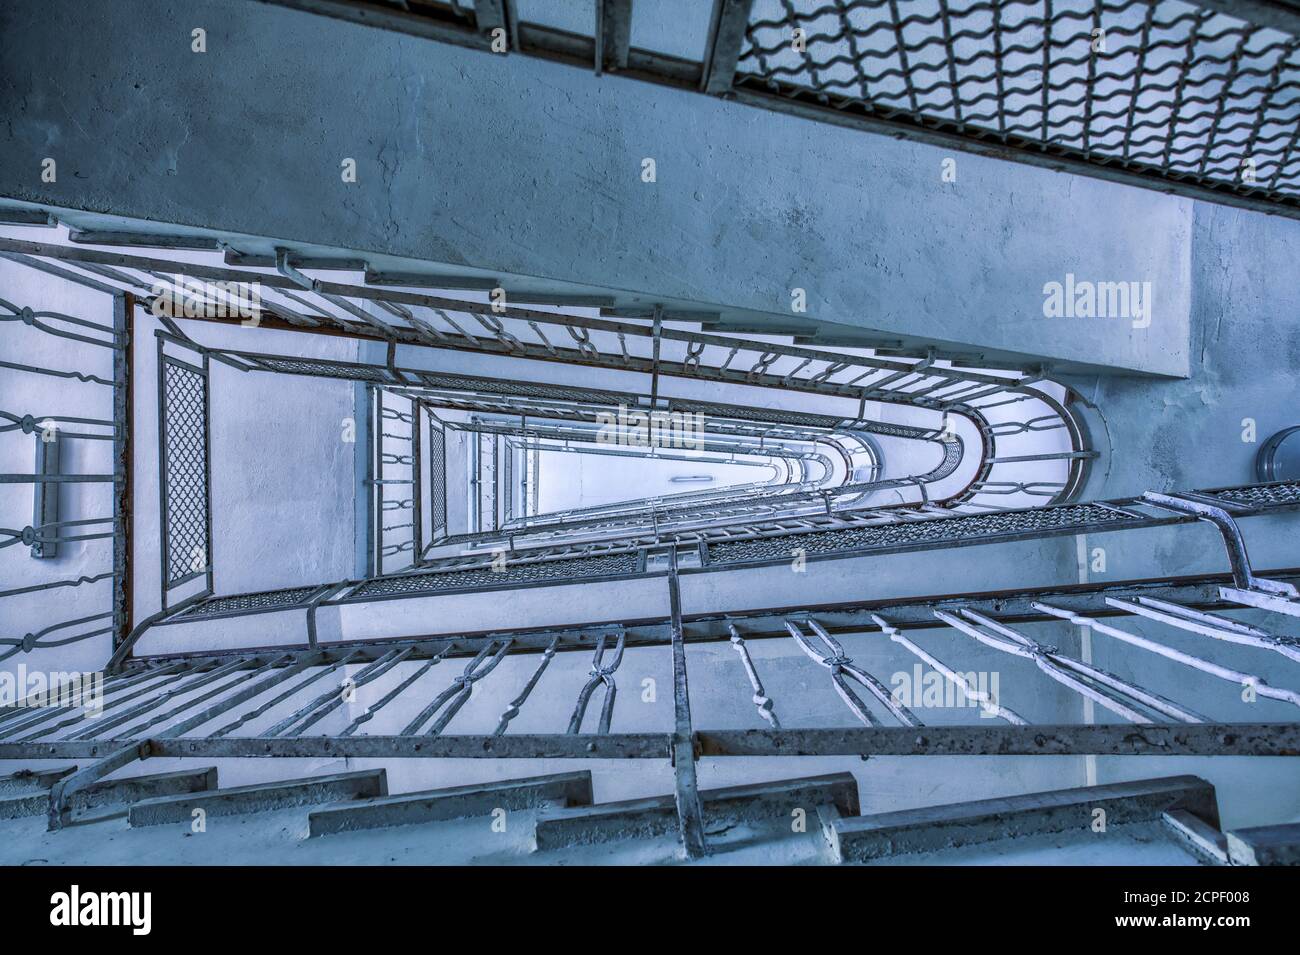 view from below up on staircase with iron railing, hypnotic image, cold tone Stock Photo